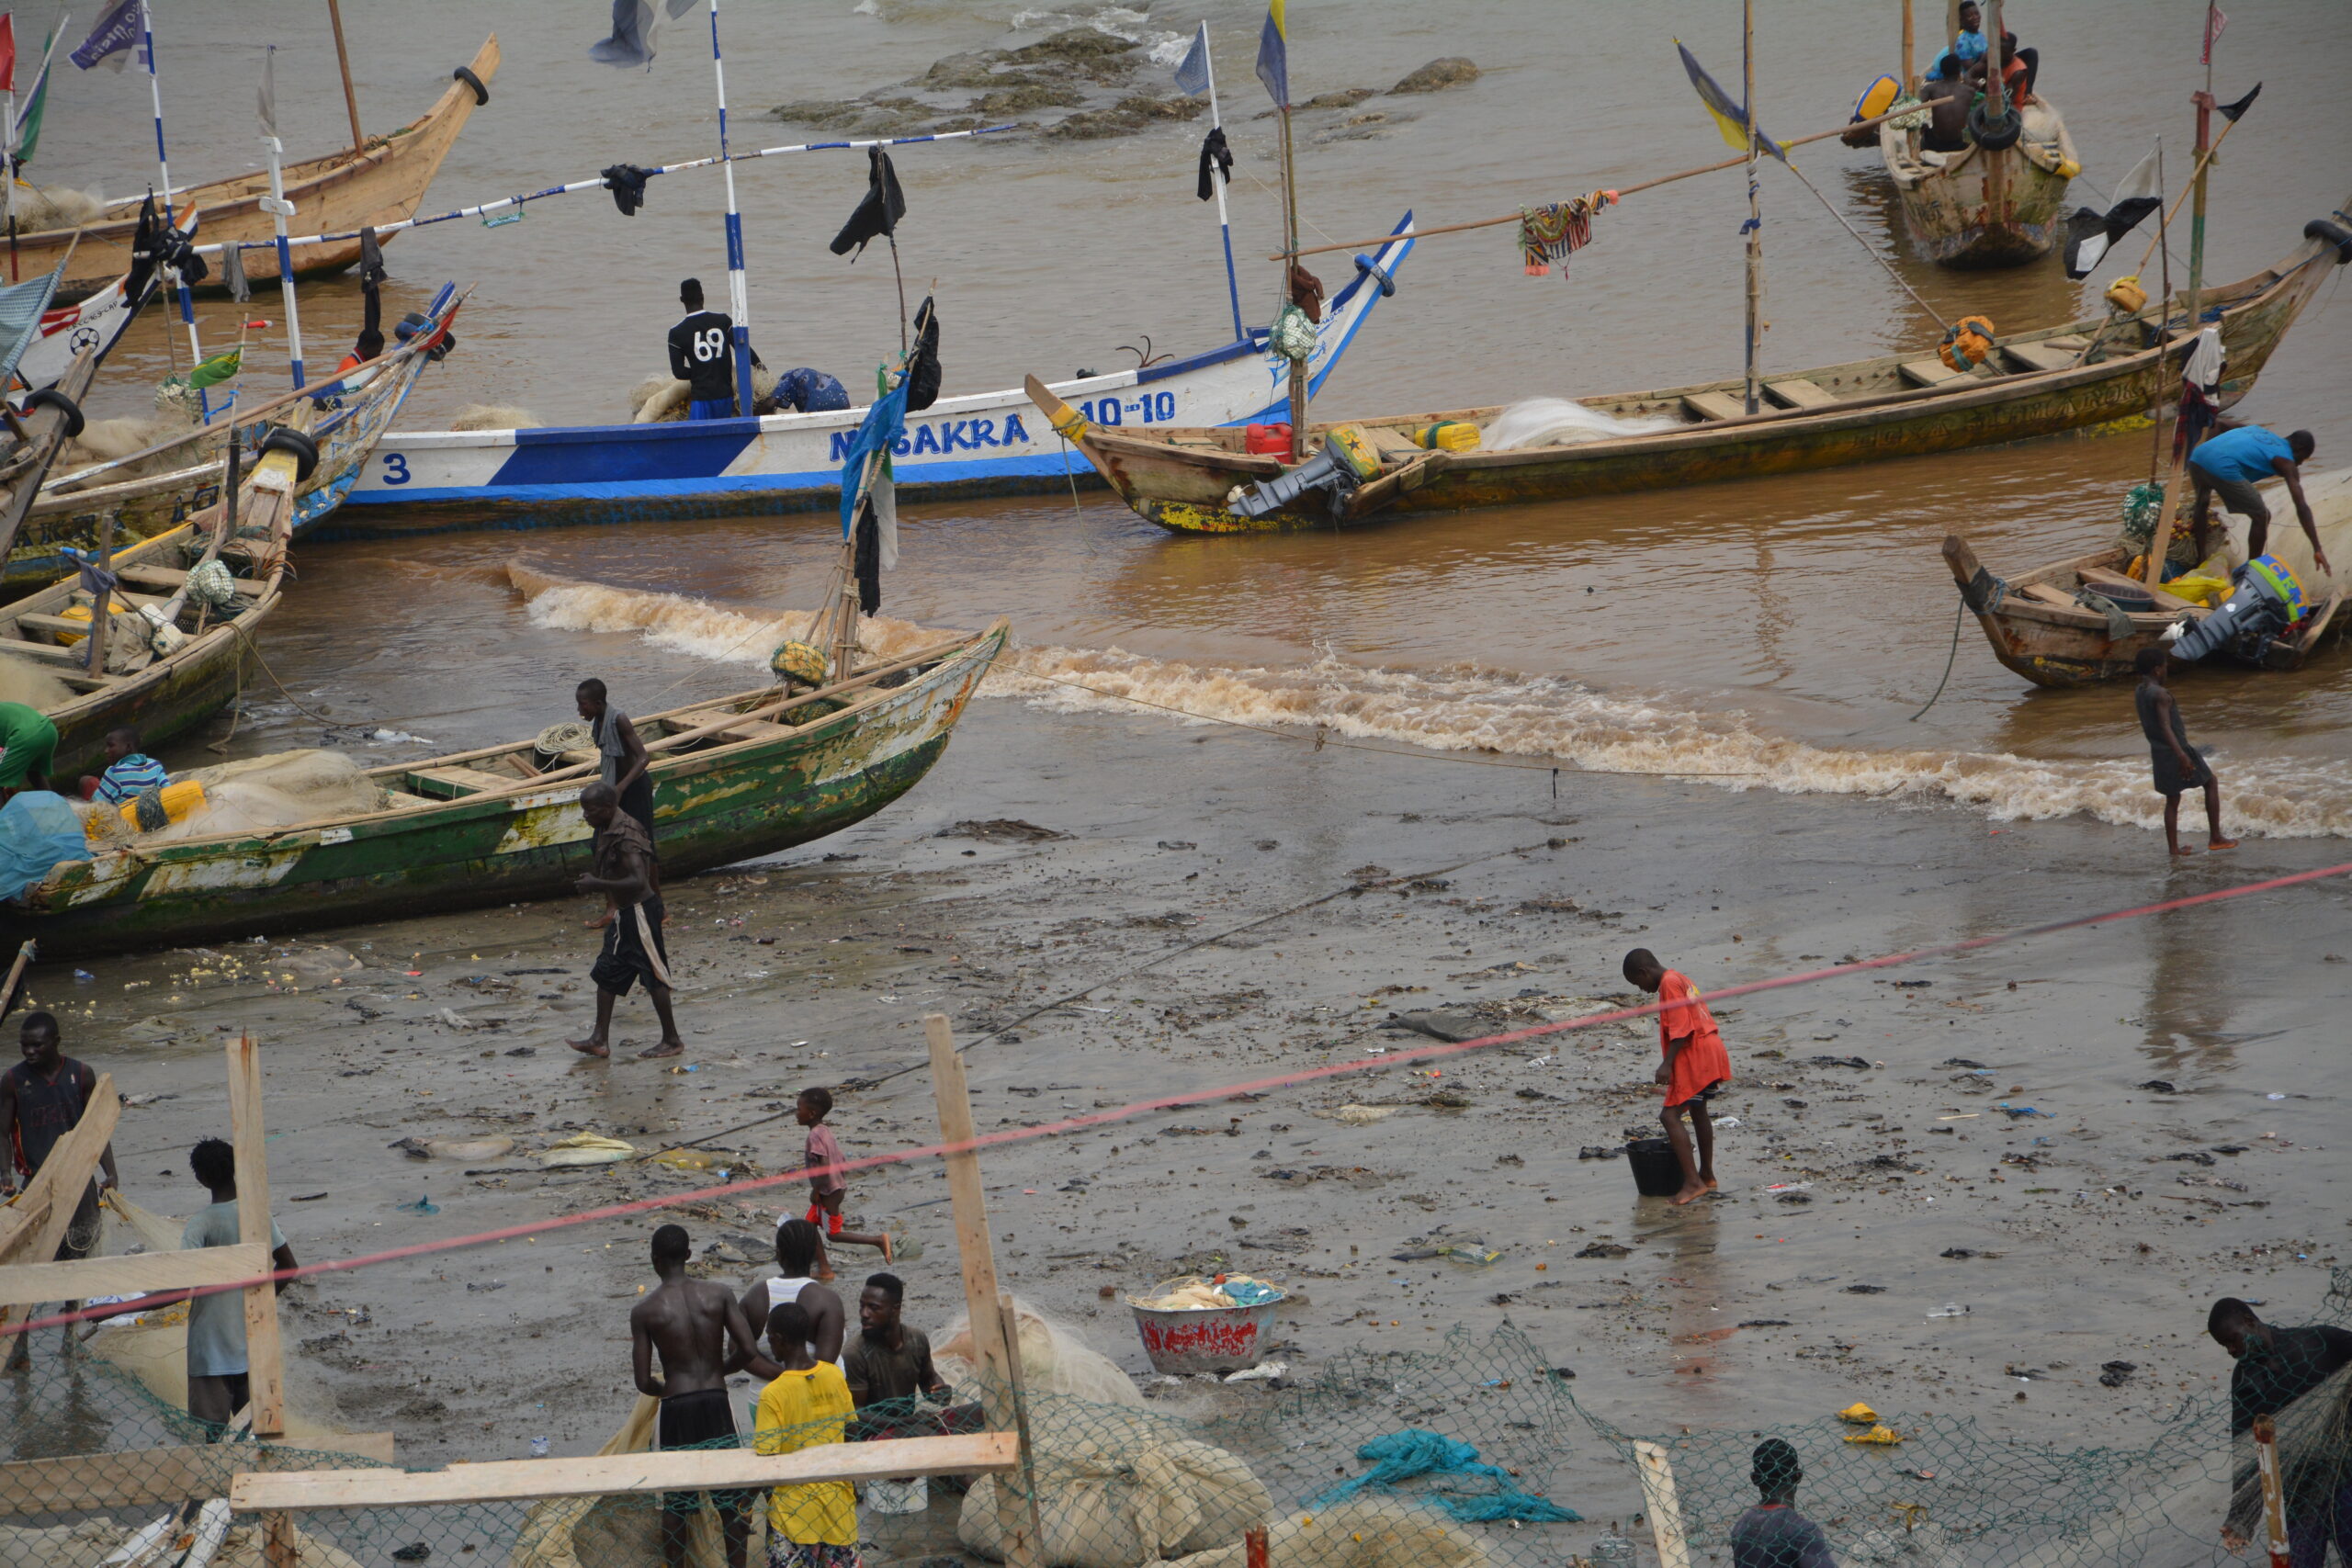 BENEATH A SLAVE castle at the edge of the Atlantic Ocean, Ghanaian fishermen are hard at work.